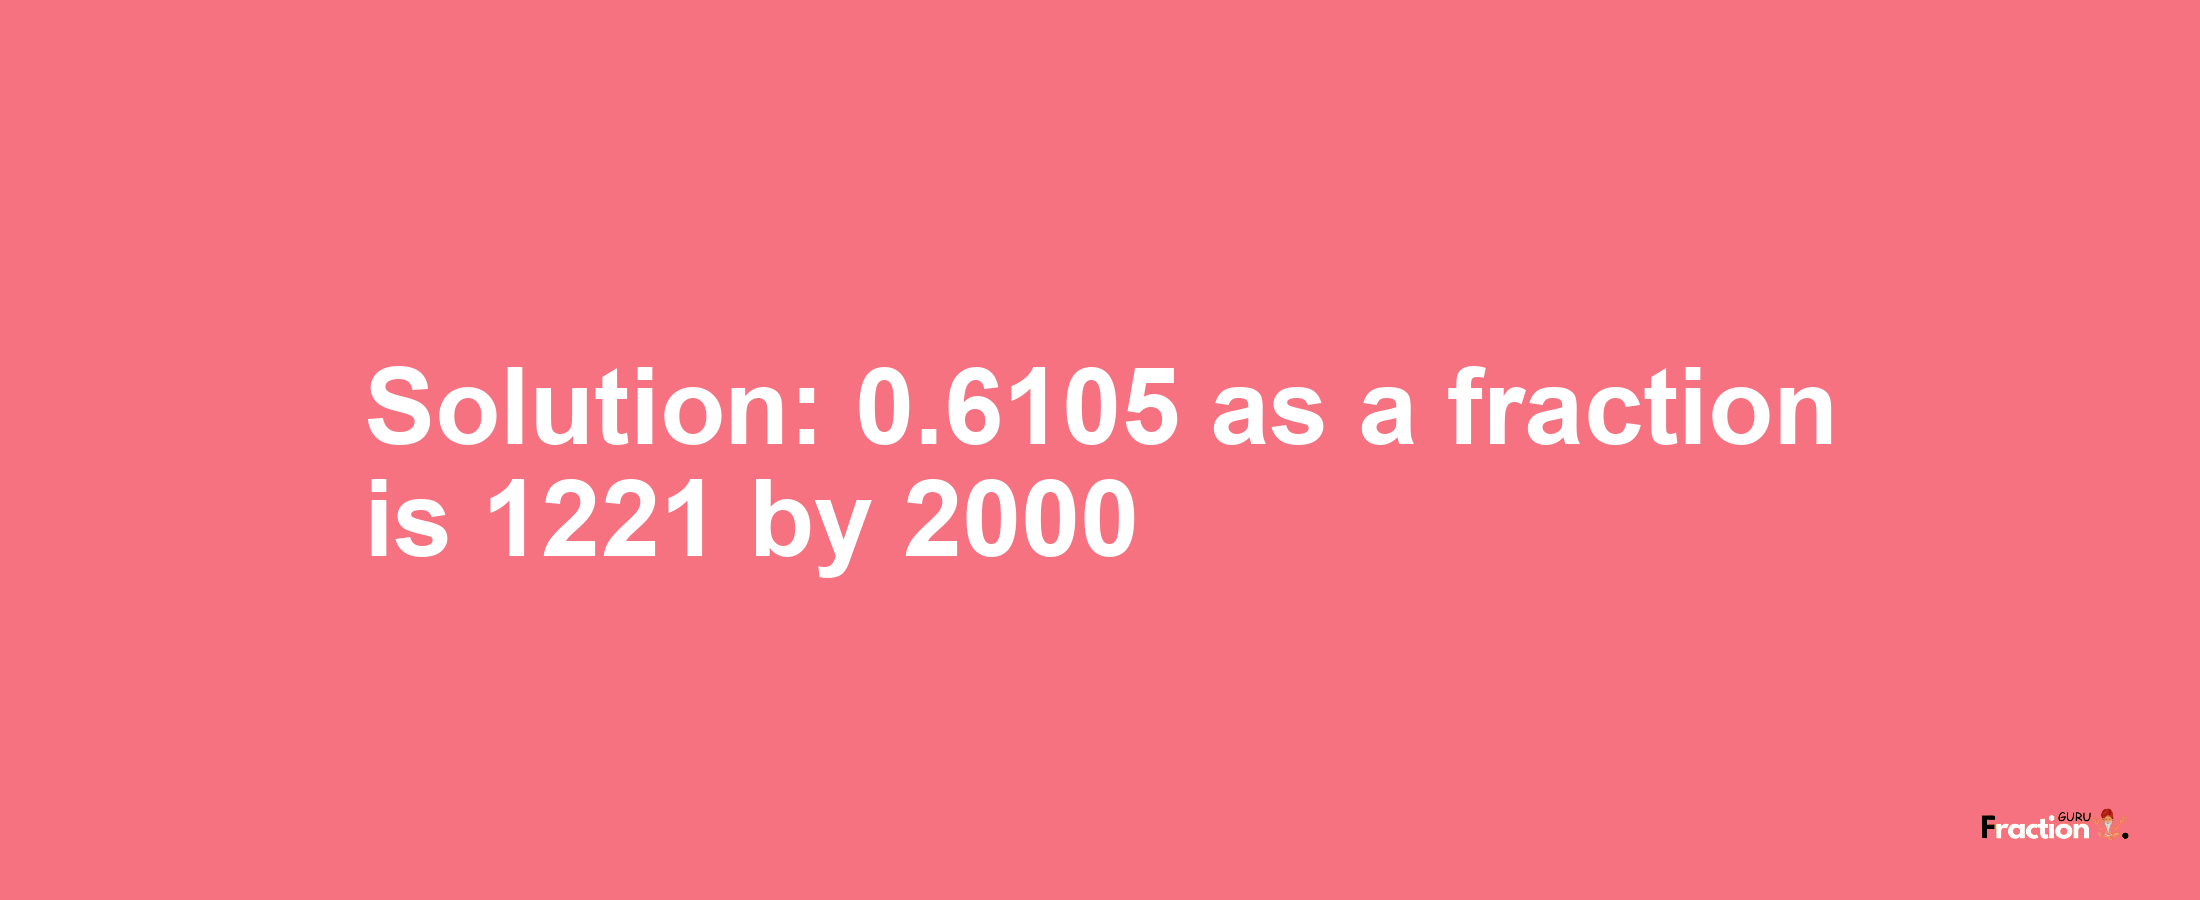 Solution:0.6105 as a fraction is 1221/2000